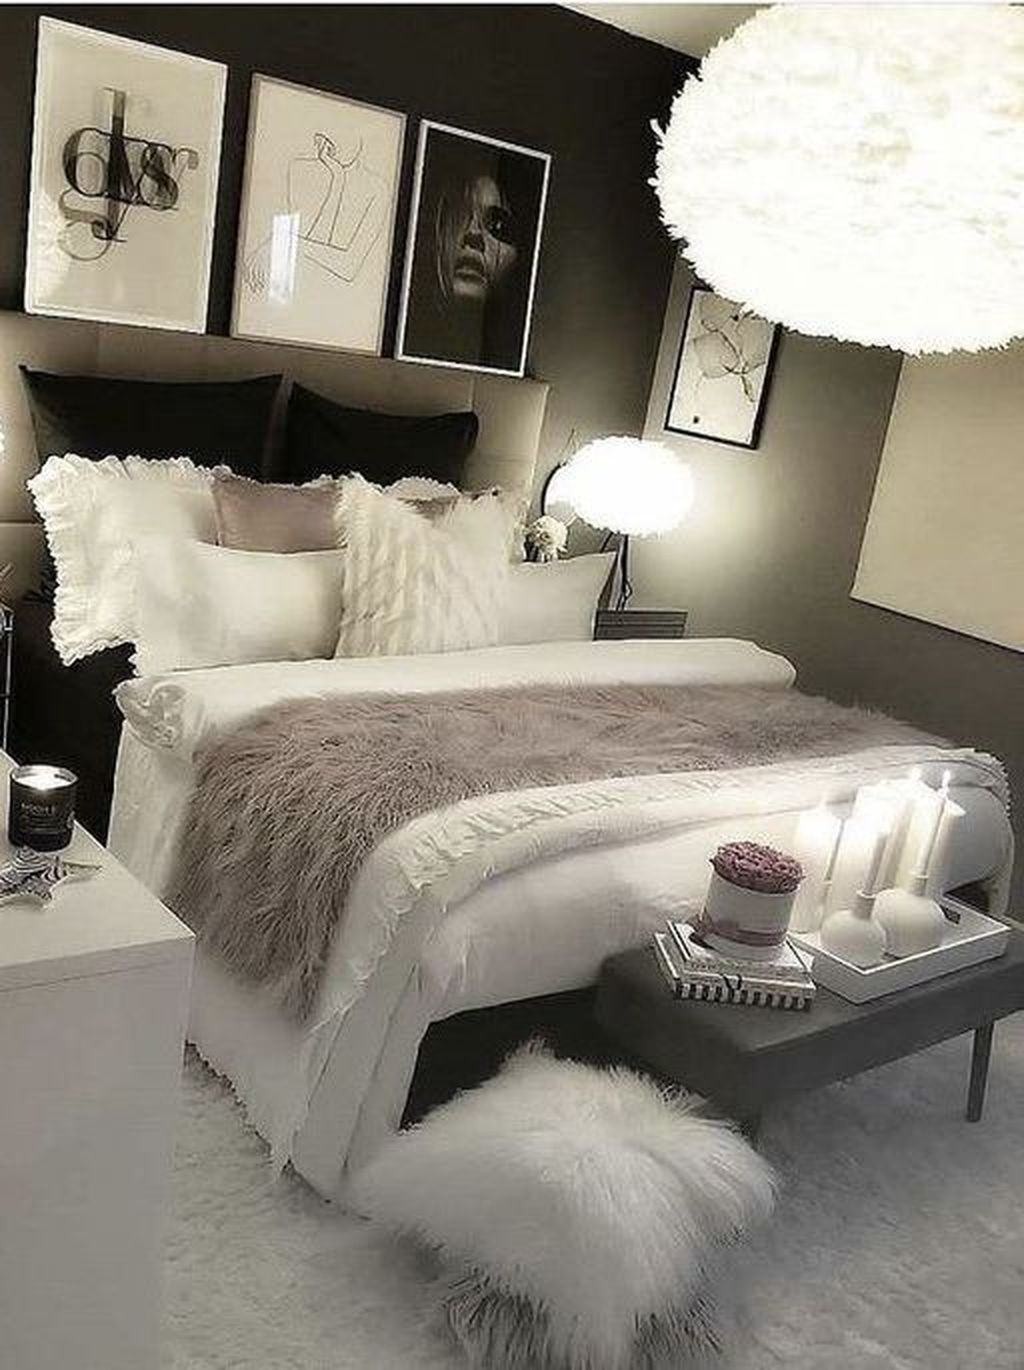 Admiring Bedroom Decor Ideas To Have Right Now 04